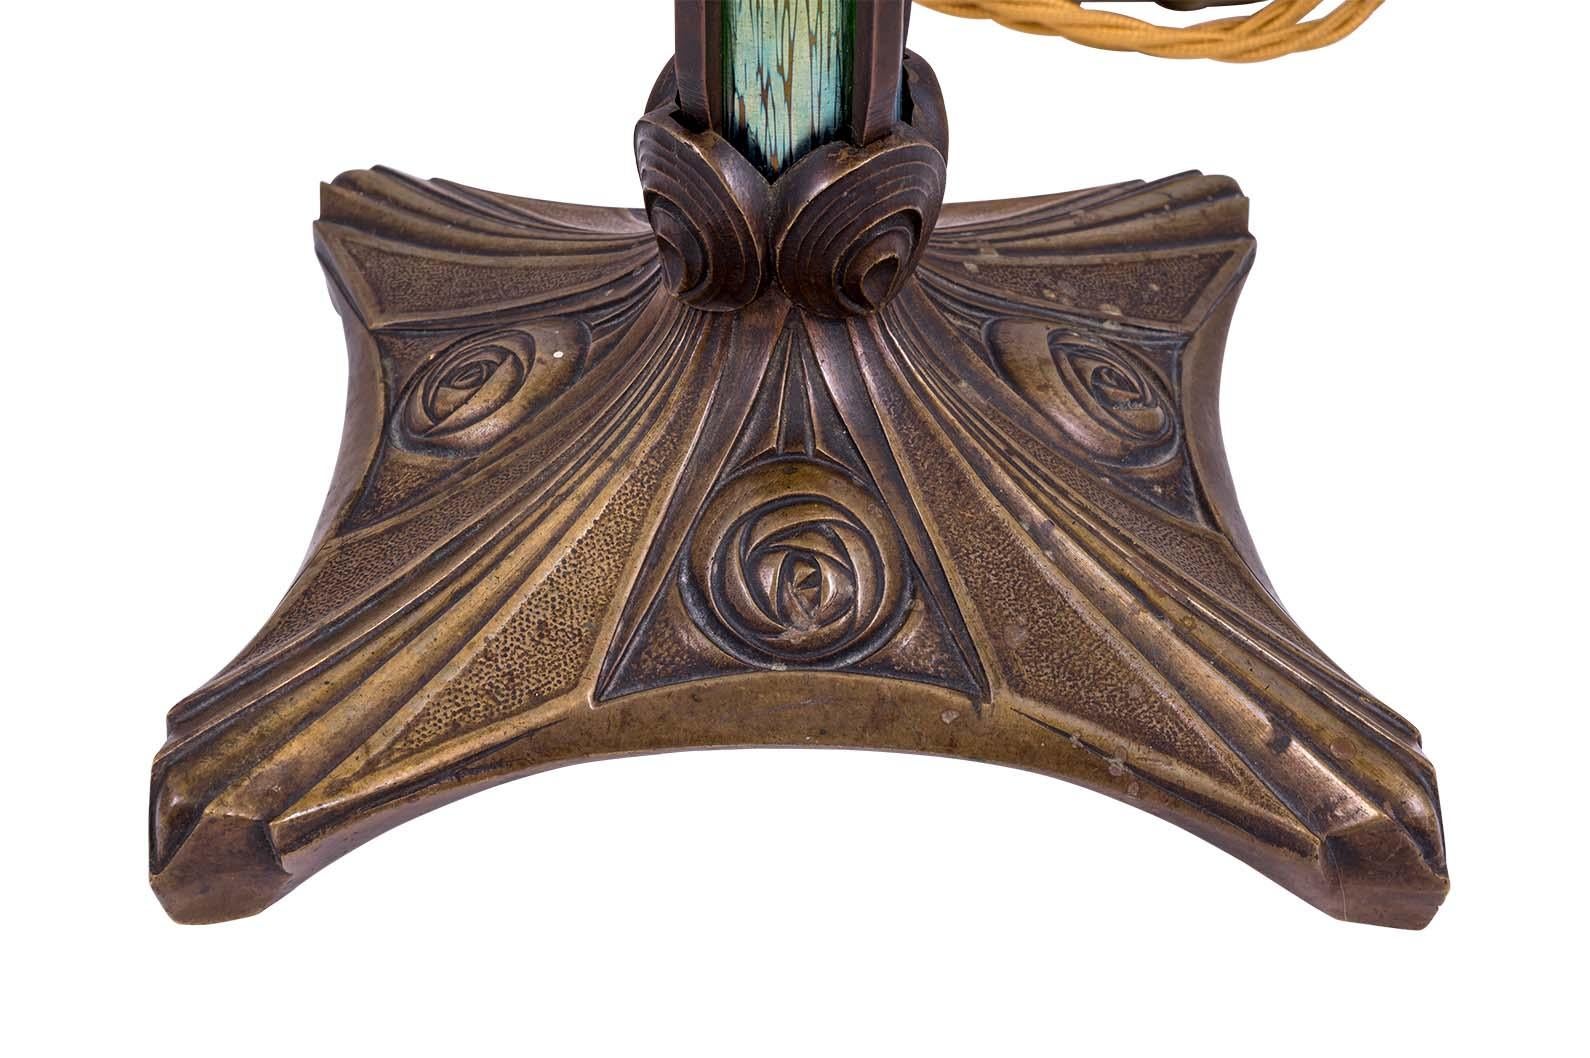 Cast Art Nouveau Table Lamp with Loetz Glass Inlays Bronze Glasgow Rose Functional